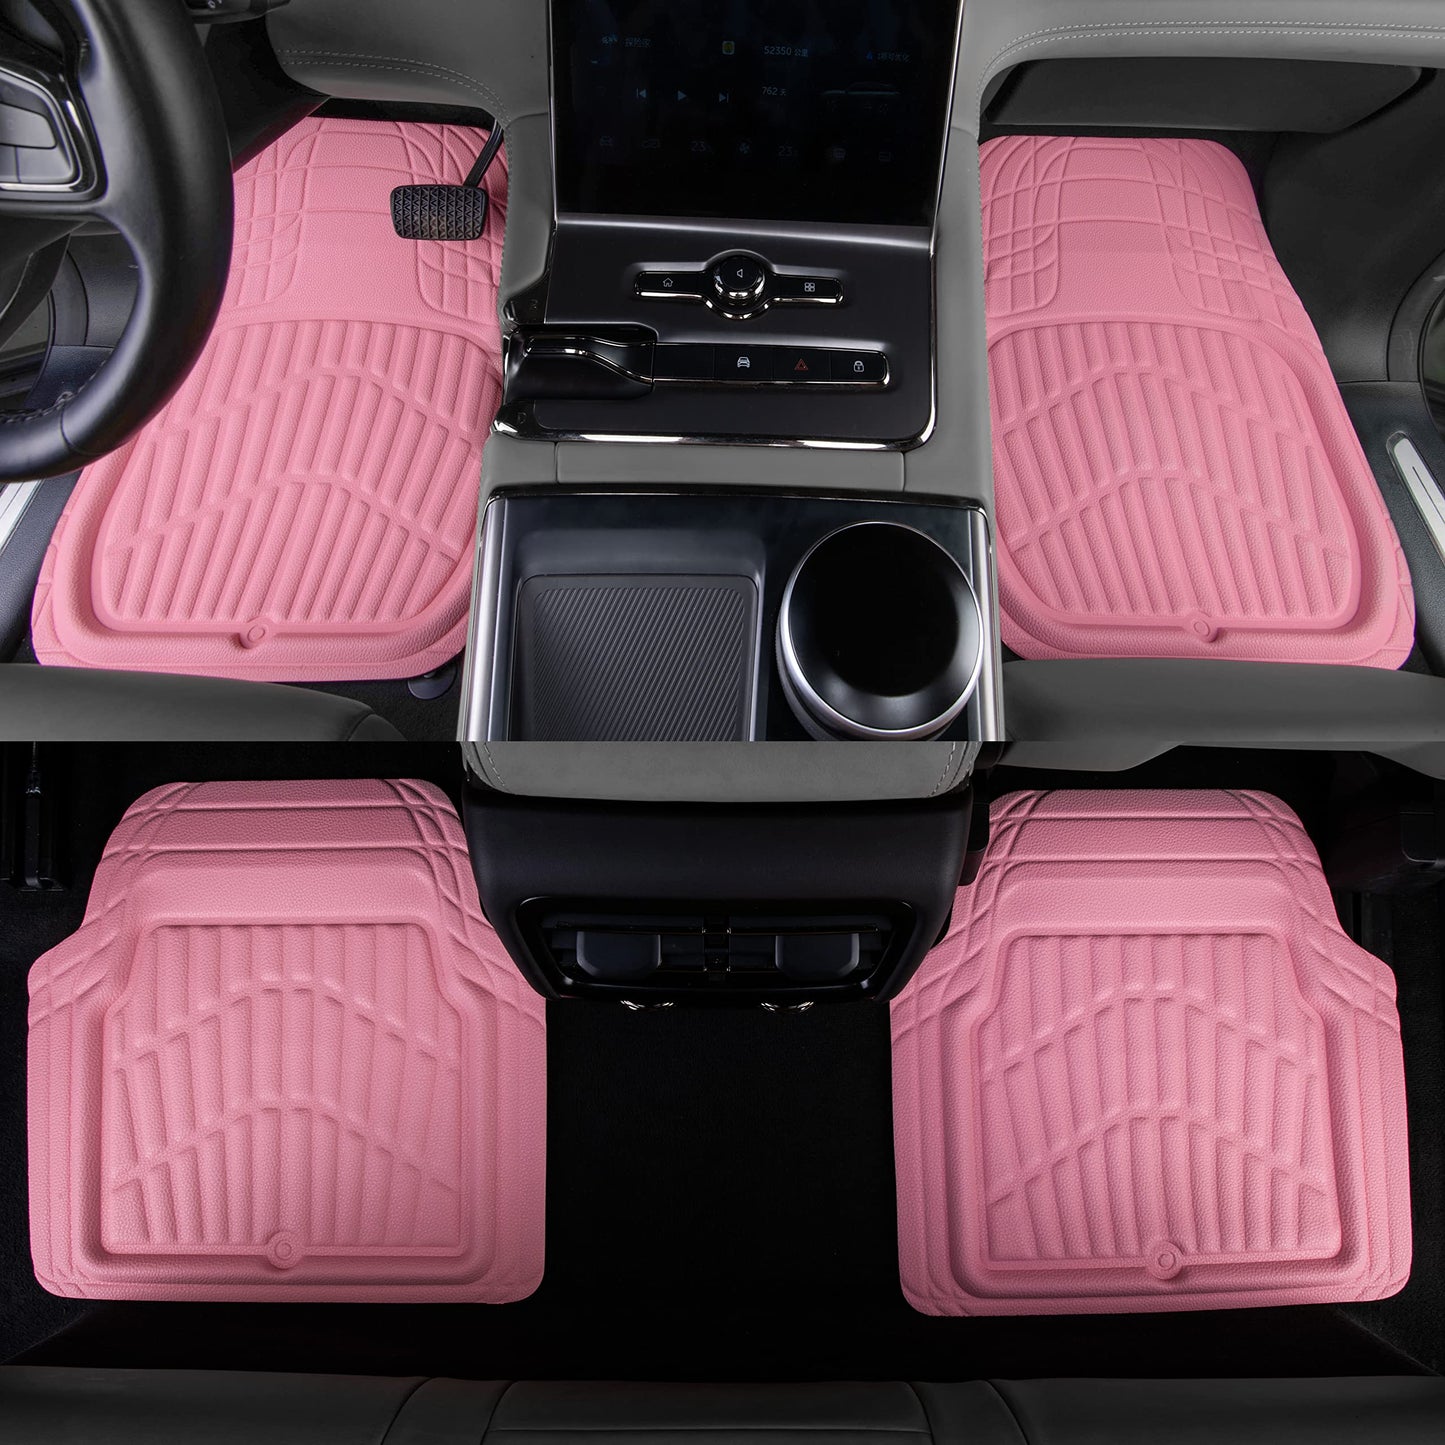 Leather Car Floor Mats, Waterproof All-Weather, Full Set